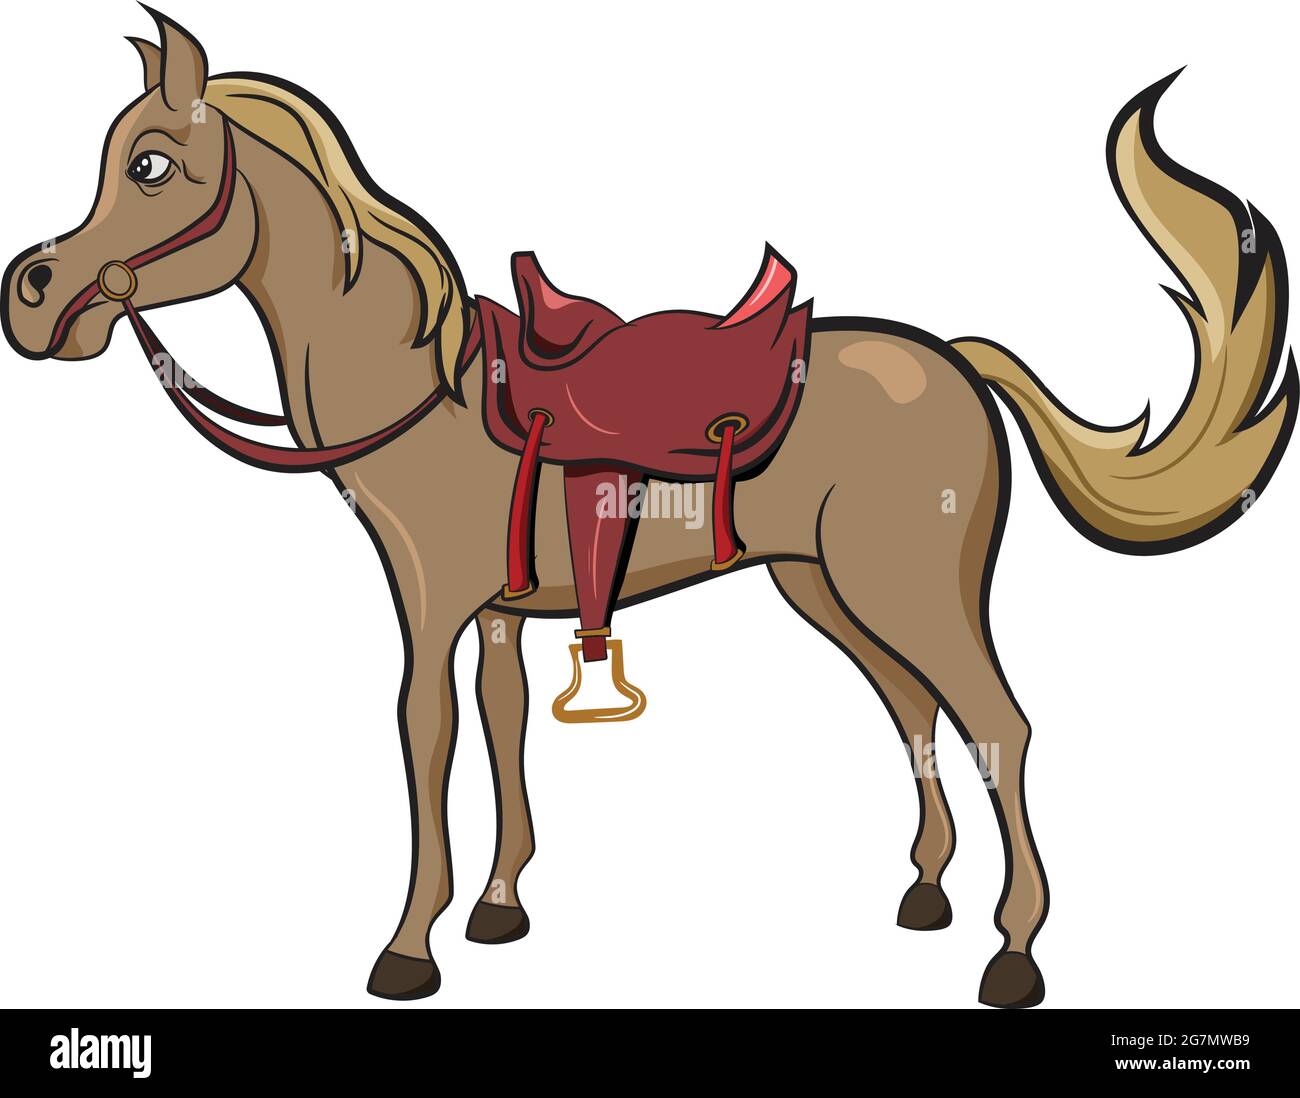 Cute Horse from the wild west with saddle. Adorable character for Childrens book. Wild West Texas Country graphic elements. Stock Vector